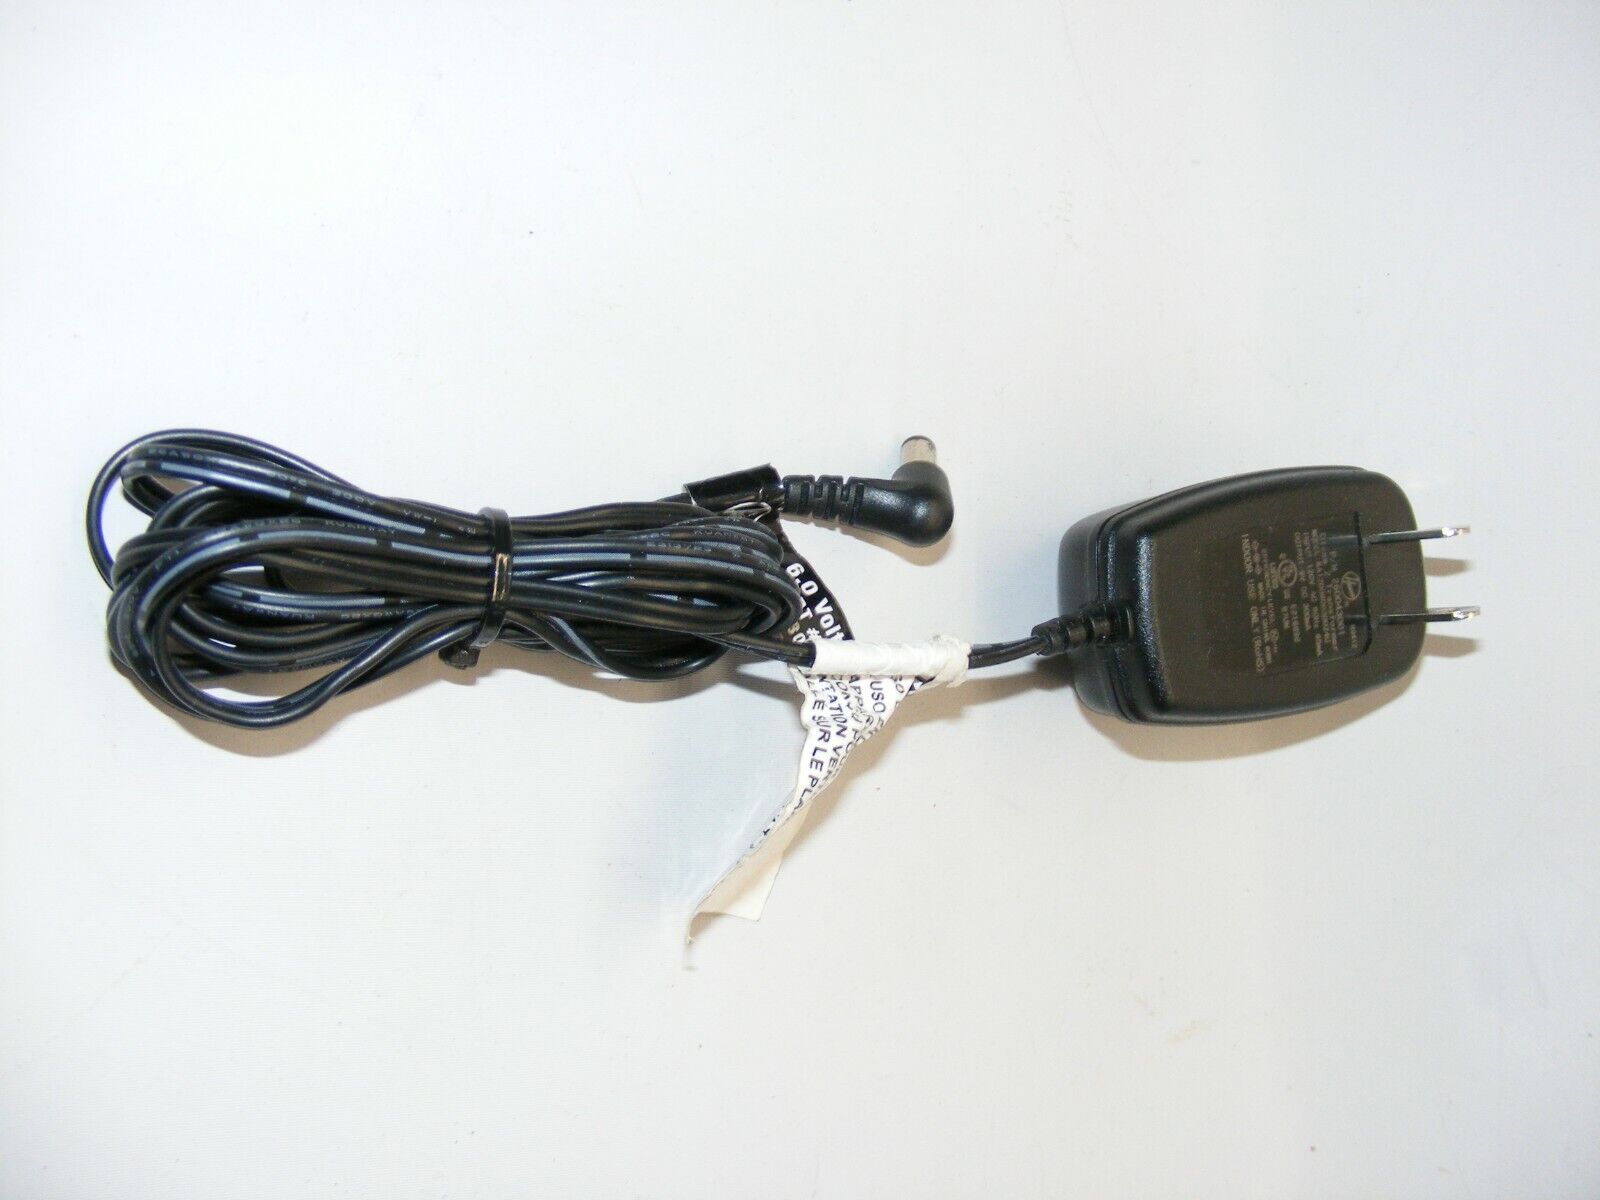 Hoover 260043001 AC Adapter For Ktec KA12D090030024U 260043001 Class 2 Transform Brand: Hoover Cable Length: 6 ft MP